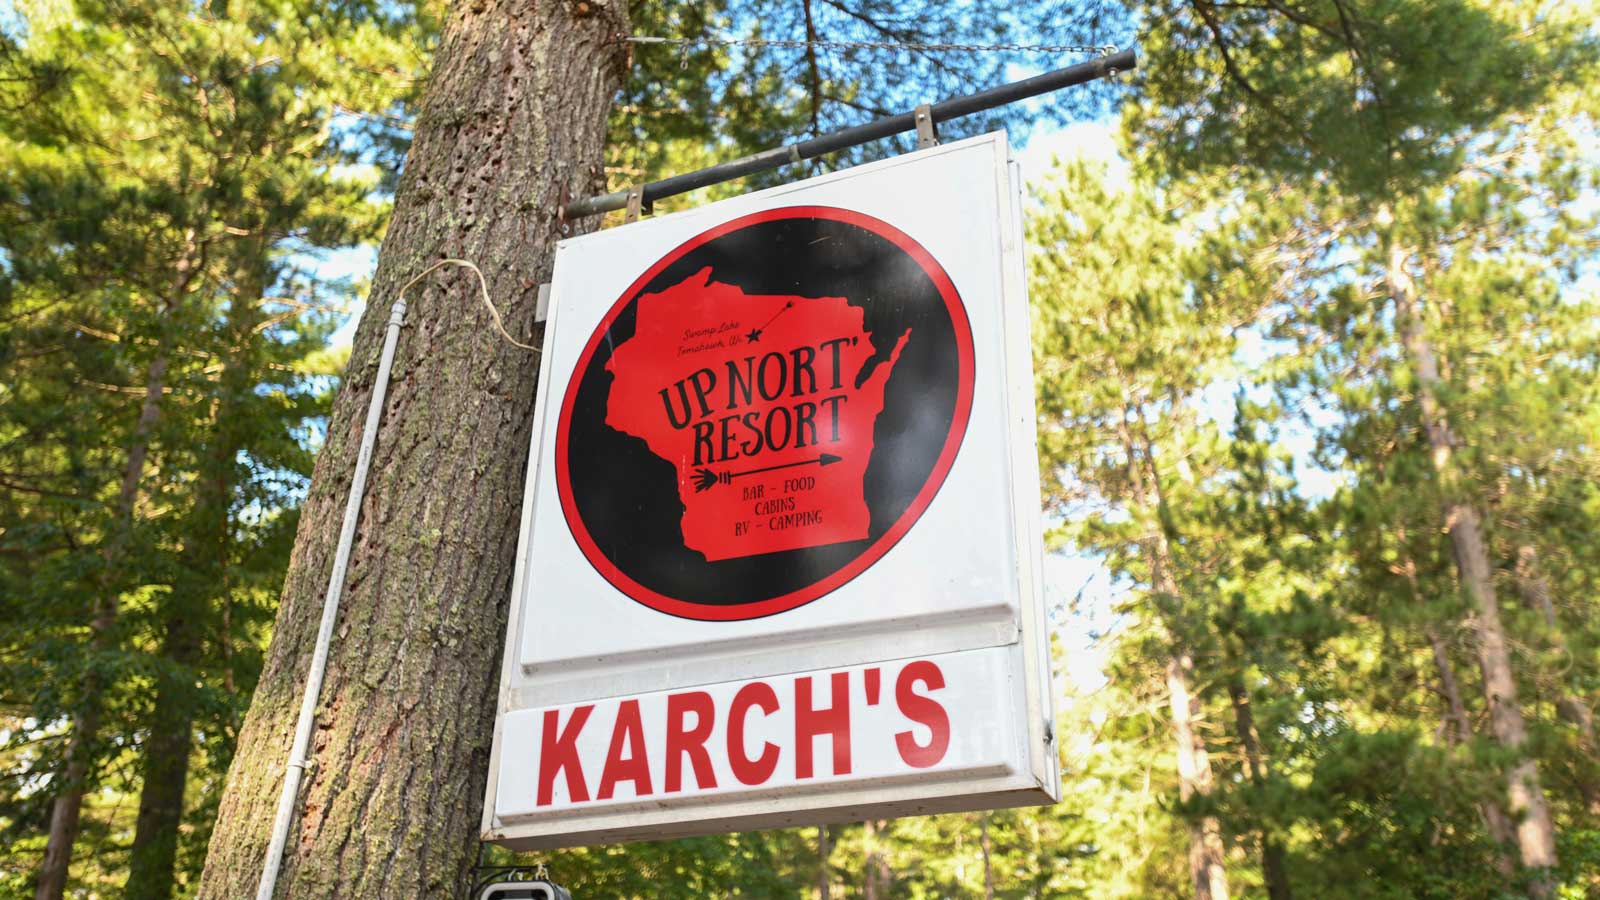 Karch's Up Nort' Resort Oneida County business sign